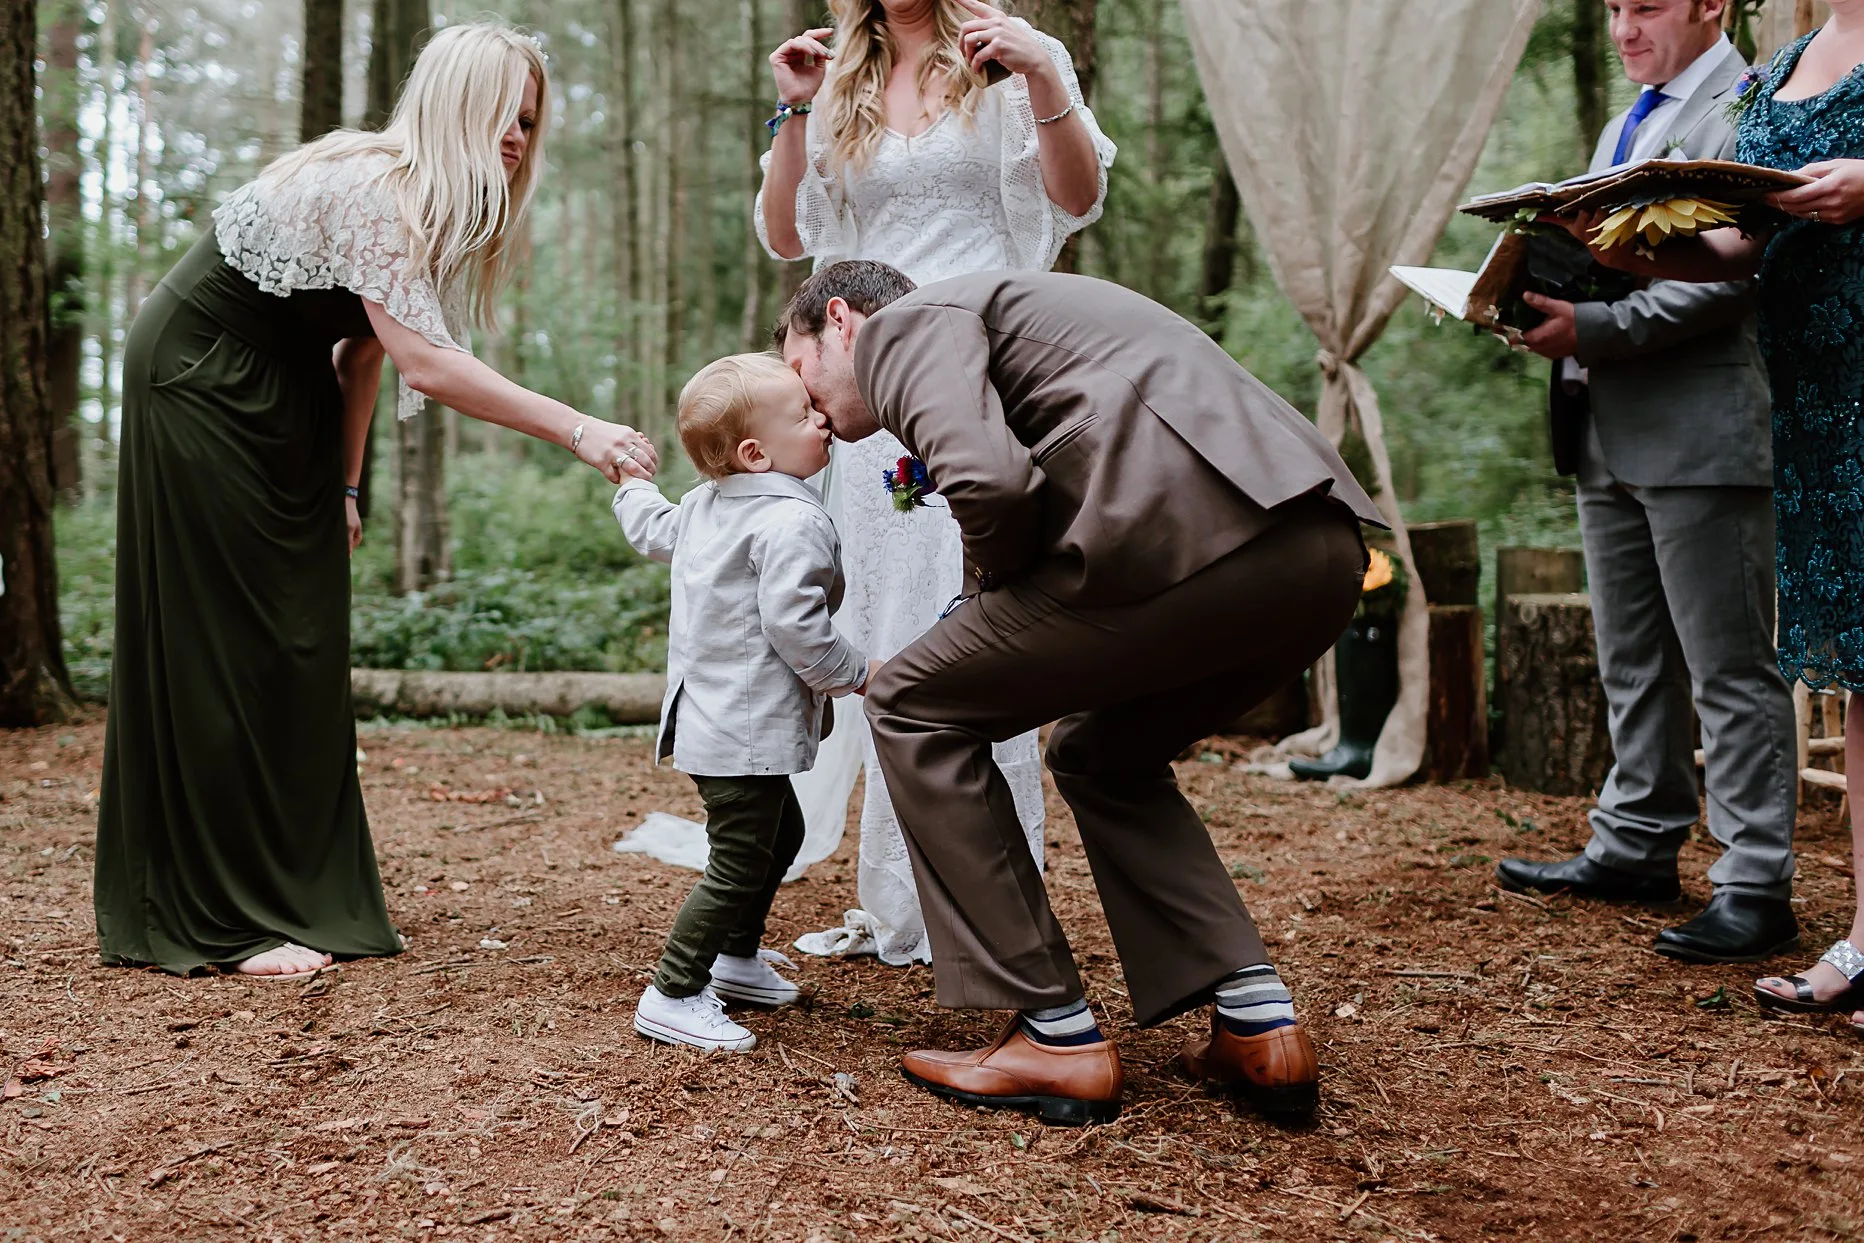 Groom leaning in for a kiss with his nephew. His nephews face is all scrunched up and looks very cute.